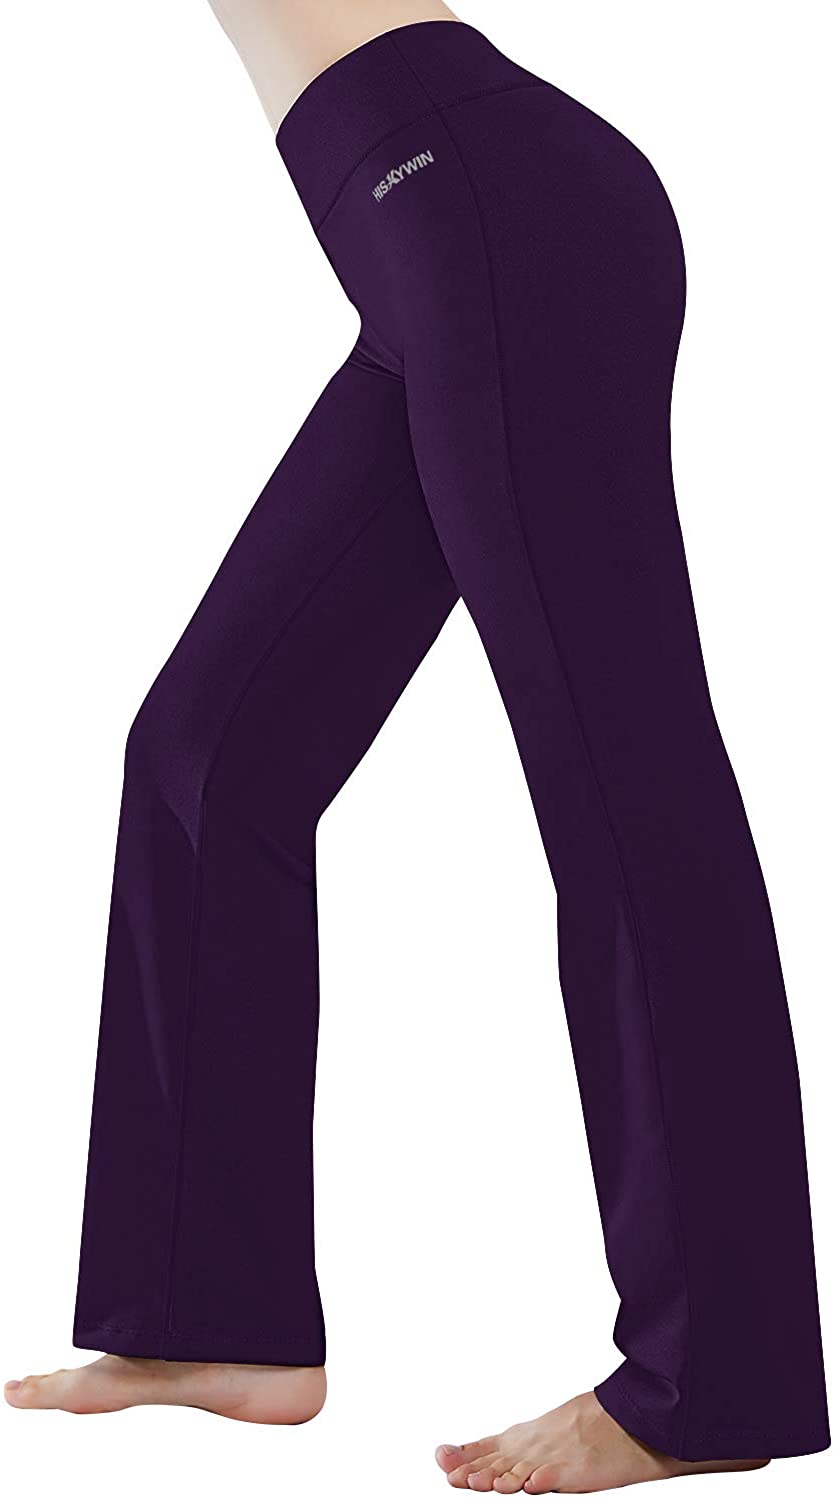 HISKYWIN Inner Pocket Yoga Pants 4 Way Stretch Tummy Control Workout  Running Pan